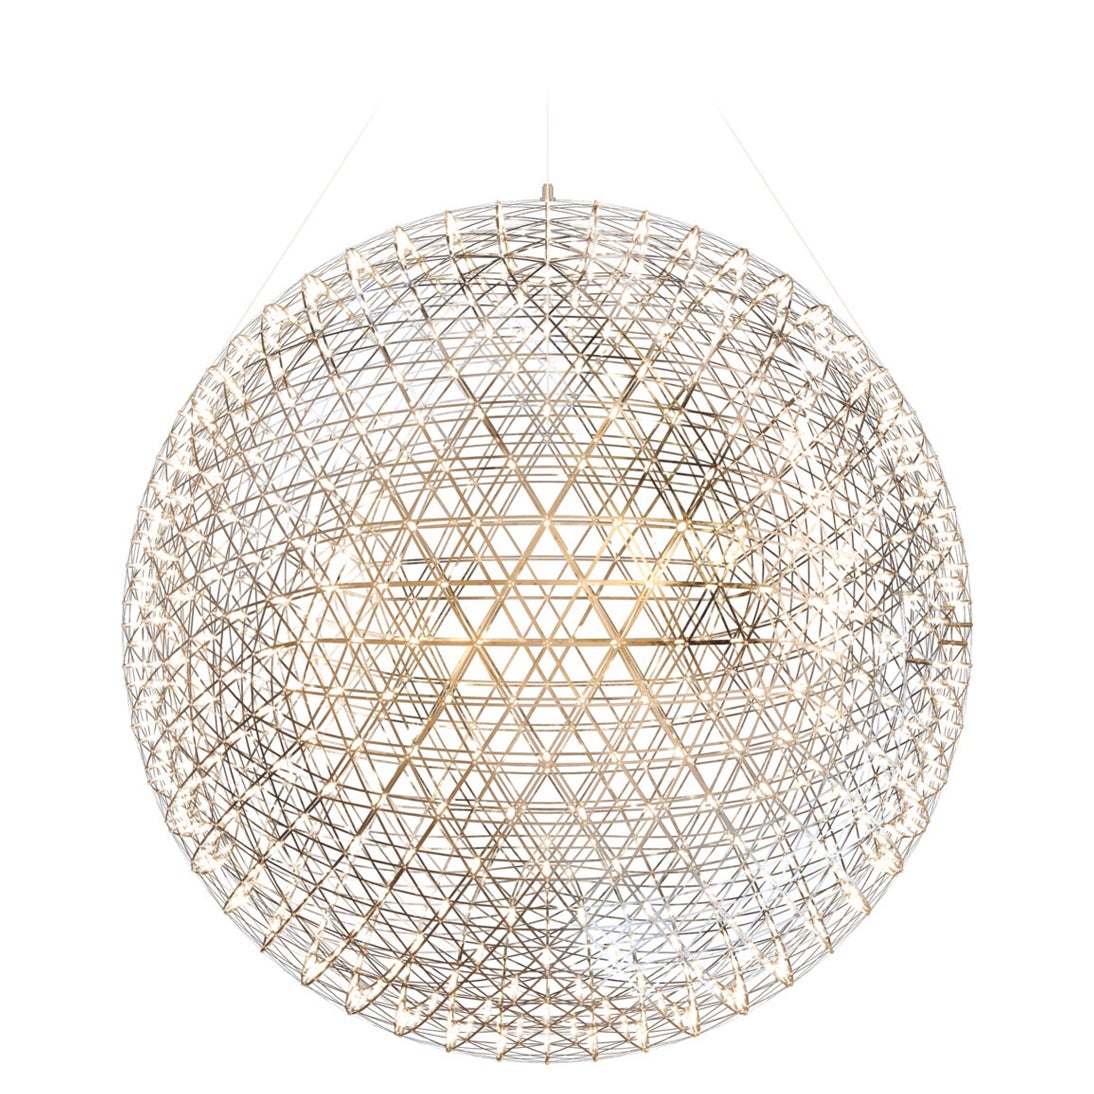 Moooi Raimond II R163 Suspension LED Lamp in Stainless Steel, 10m For Sale